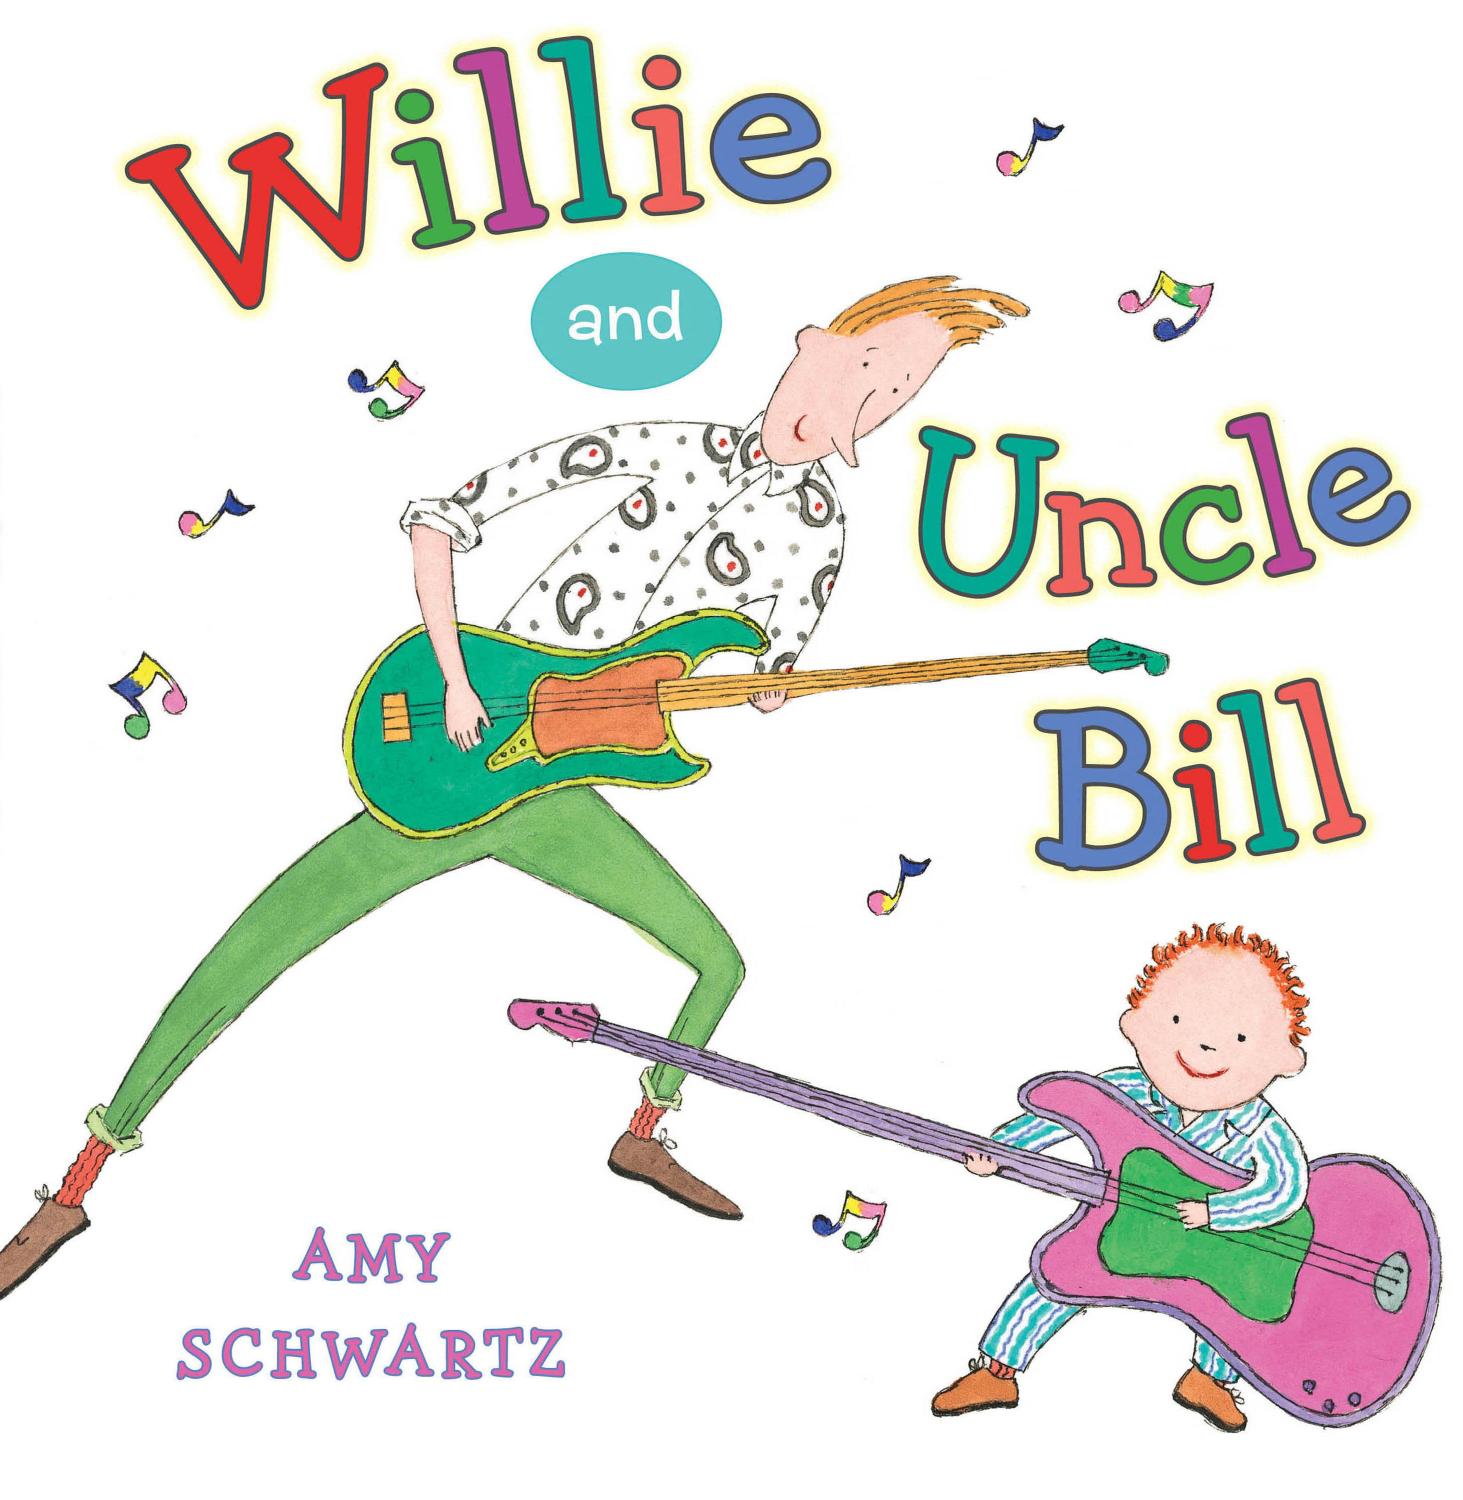 Willie and Uncle Bill